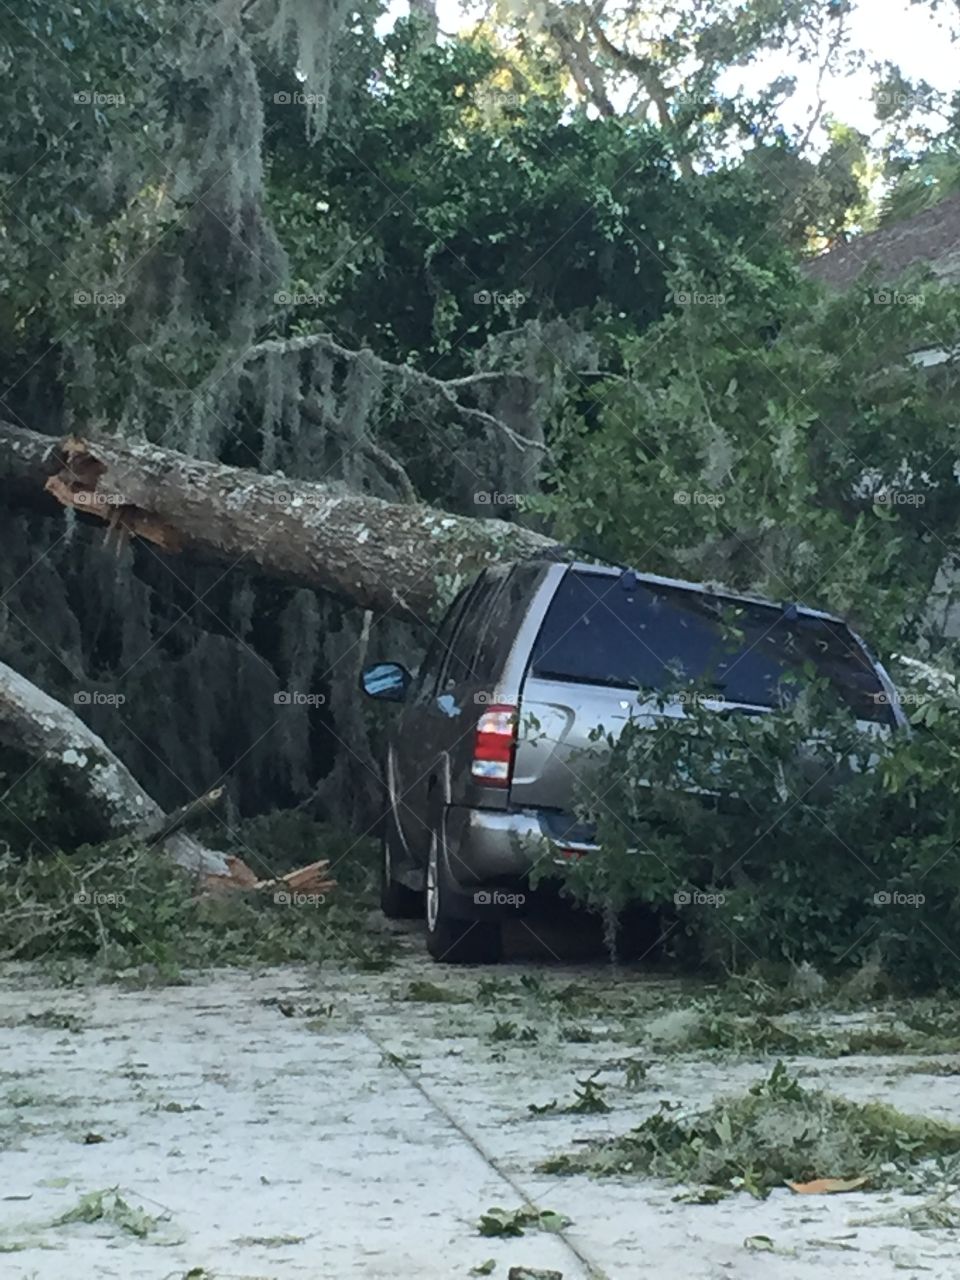 This car was damaged by a tree which fell during hurricane Matthew, in the Volusia County neighborhood of Ormond Beach, Florida.